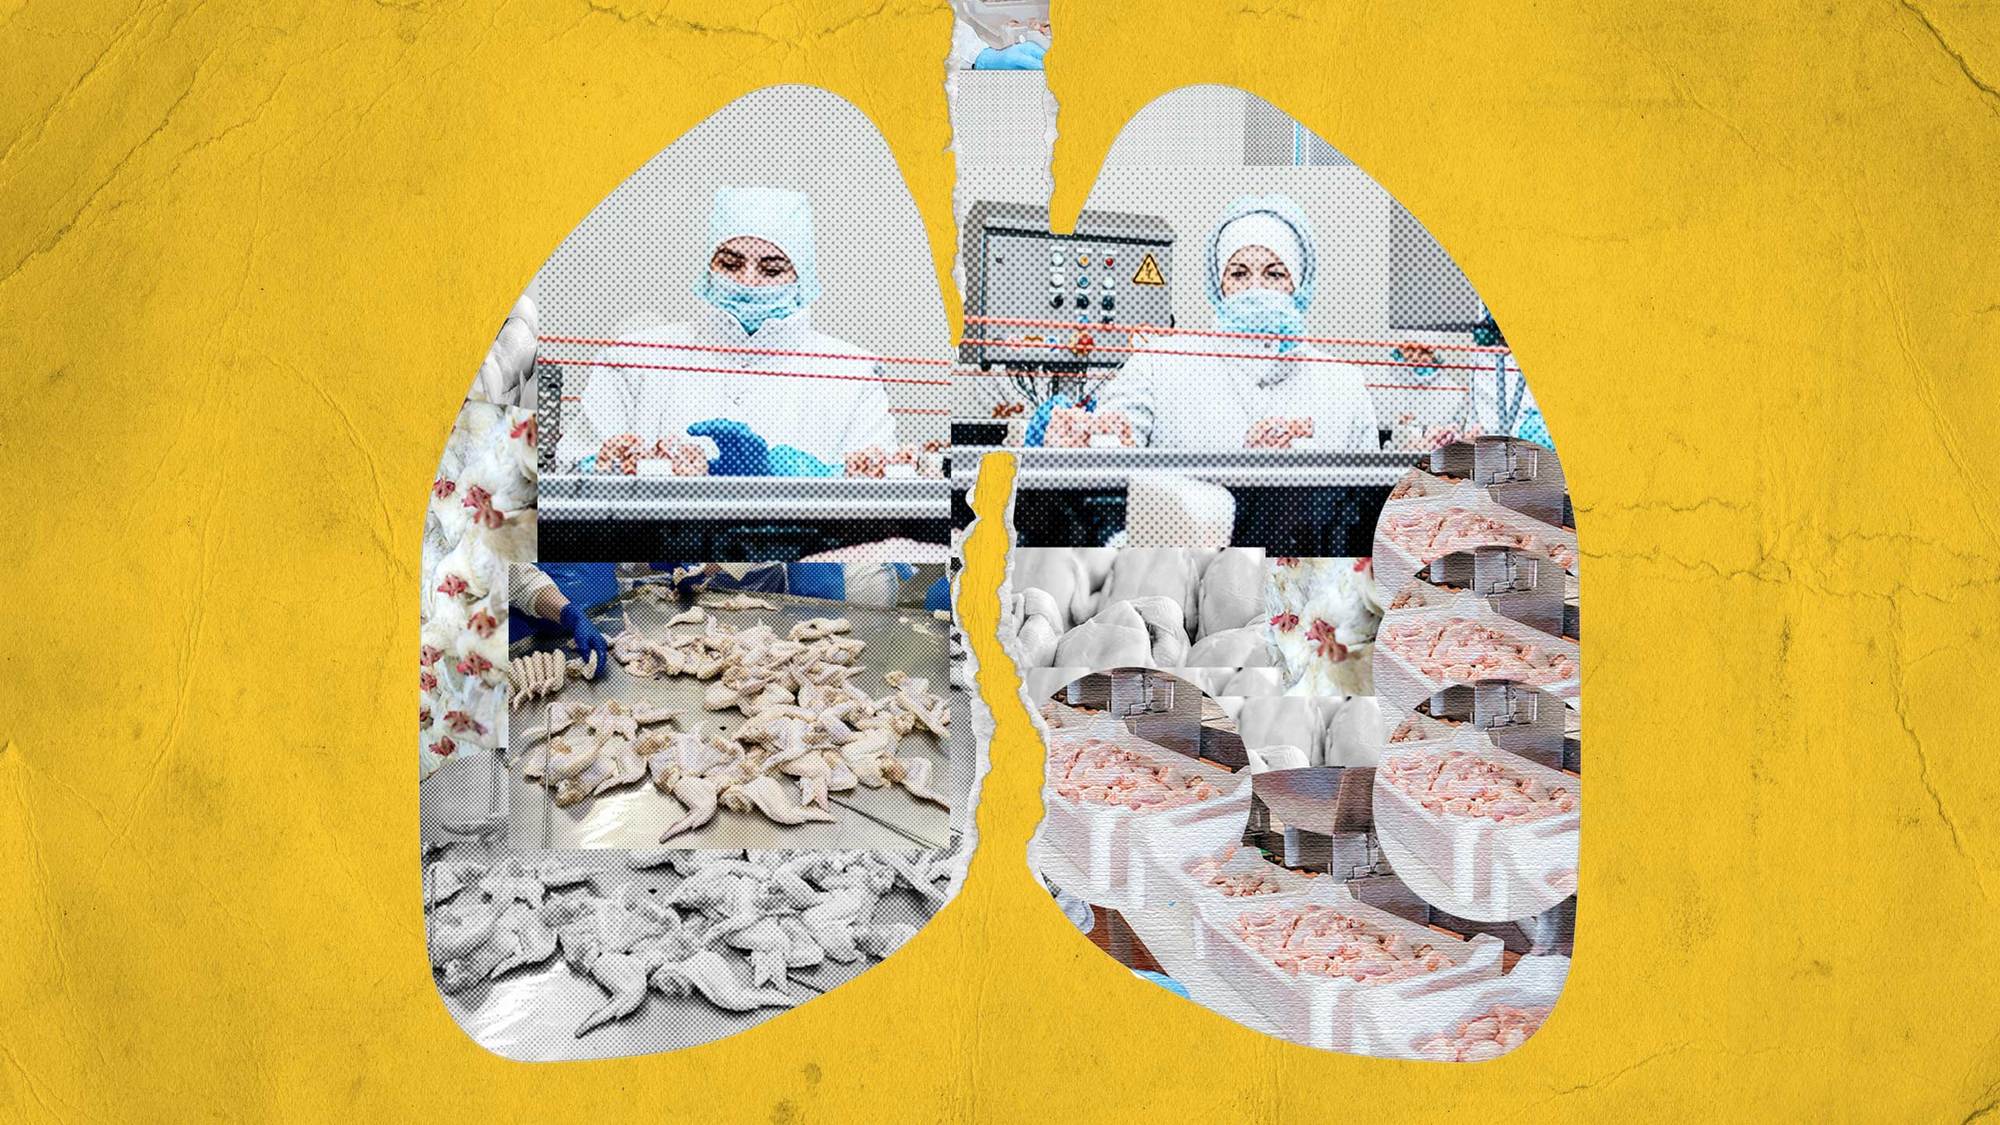 A graphic collage of two women at a processing plant, processed poultry, and a chicken production line with weathered yellow paper in the background. October 2021